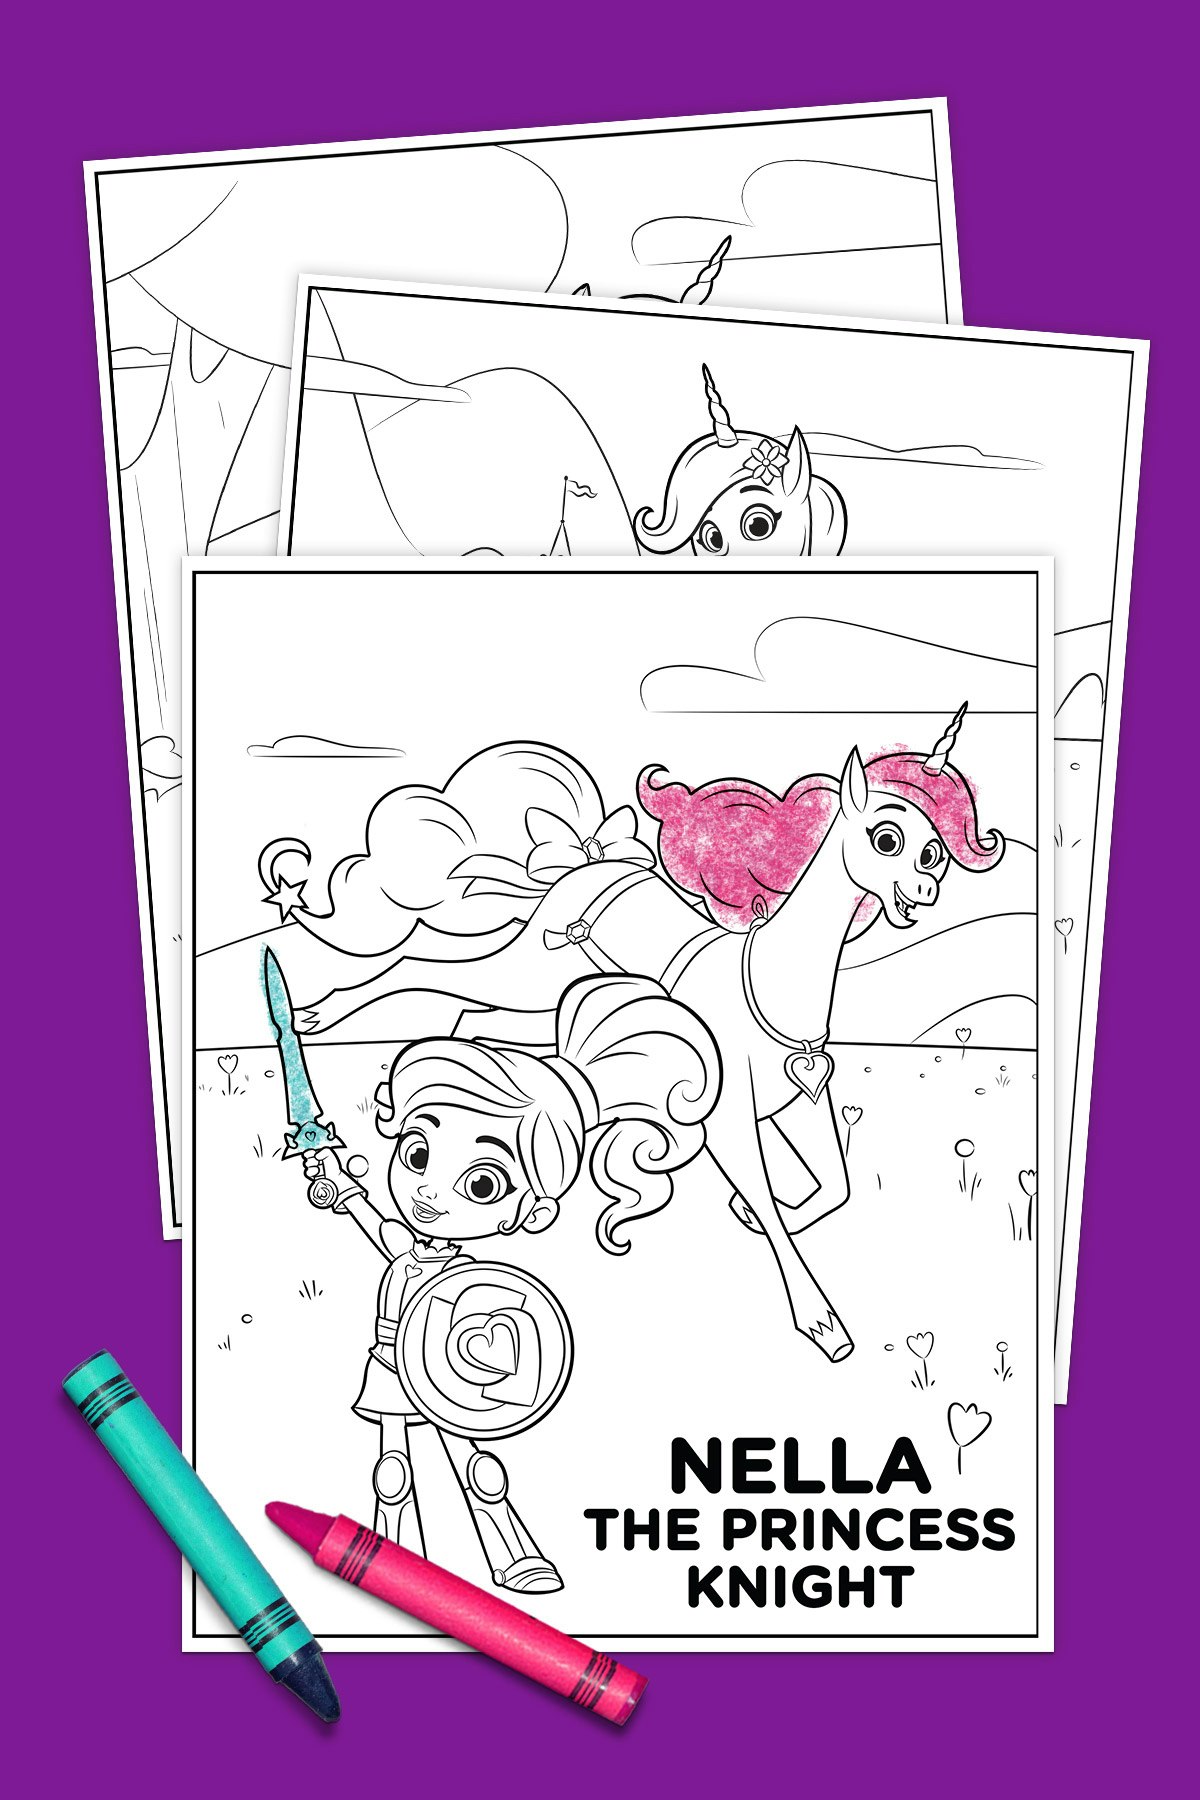 Nella the Princess Knight #Teaser - Brown Bag Labs